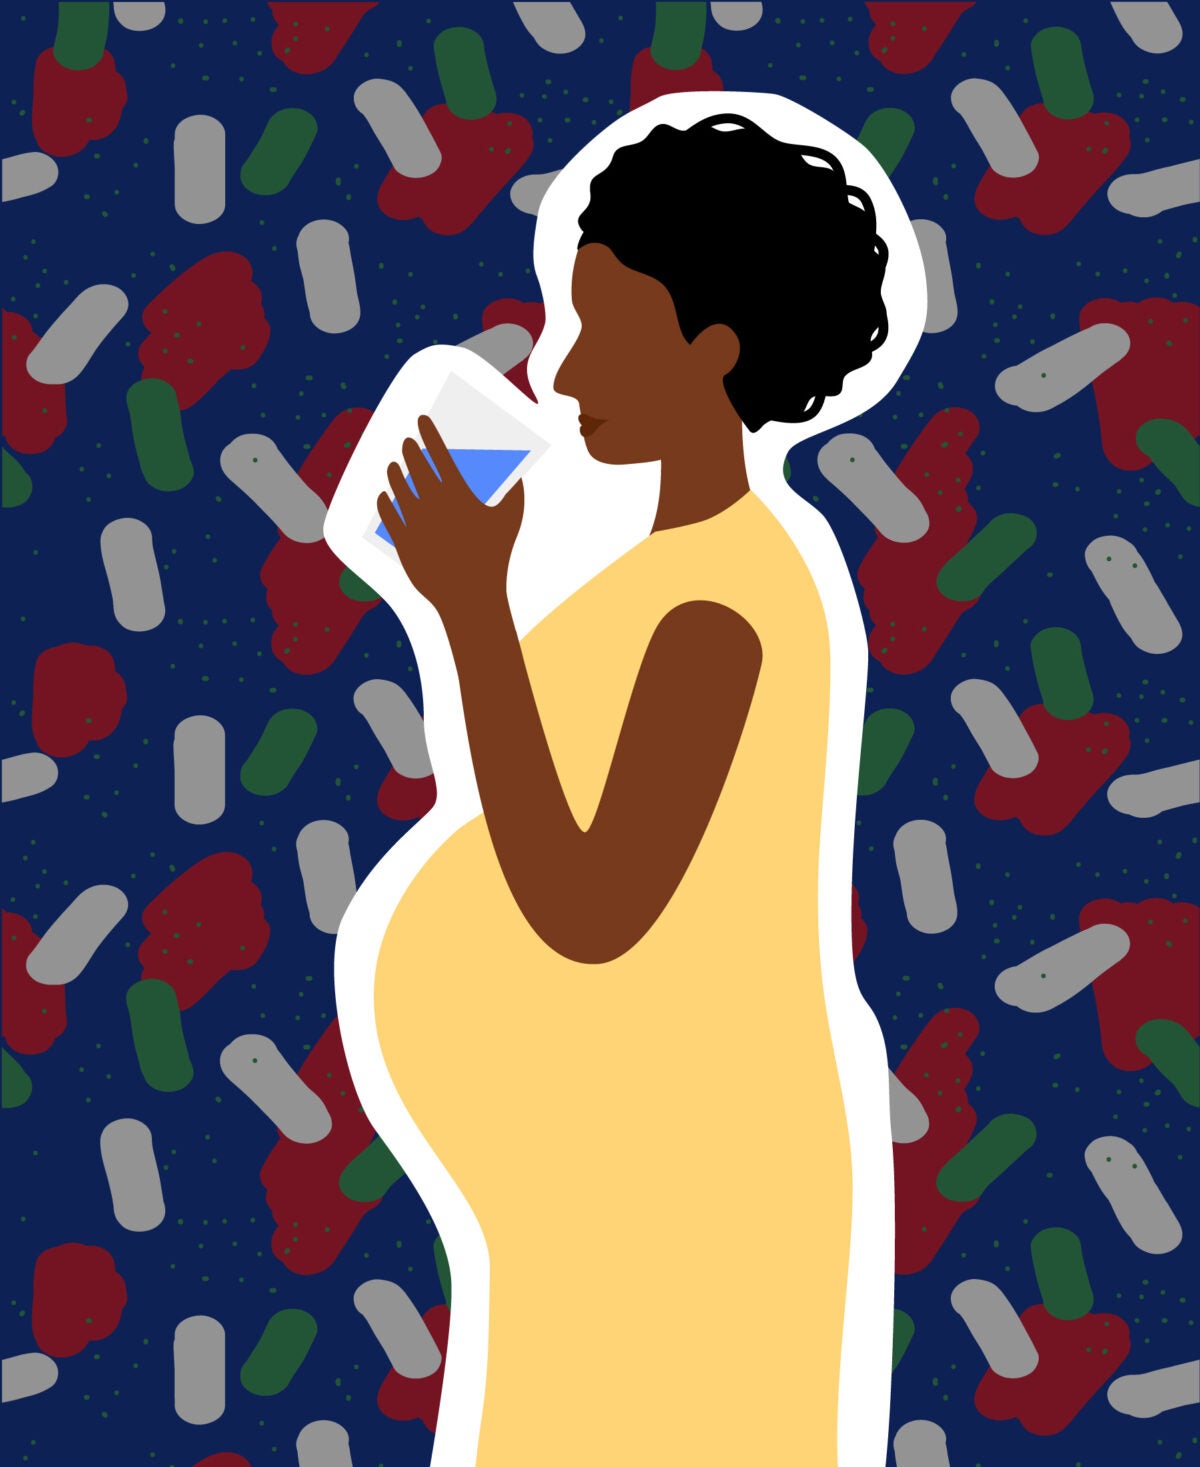 Illustration: A side portrait of a pregnant, black woman with short hair and a yellow dress drinks a glass of water. She is in front of a dark blue patterned background with oval shapes and blobs indicating toxins and germs.